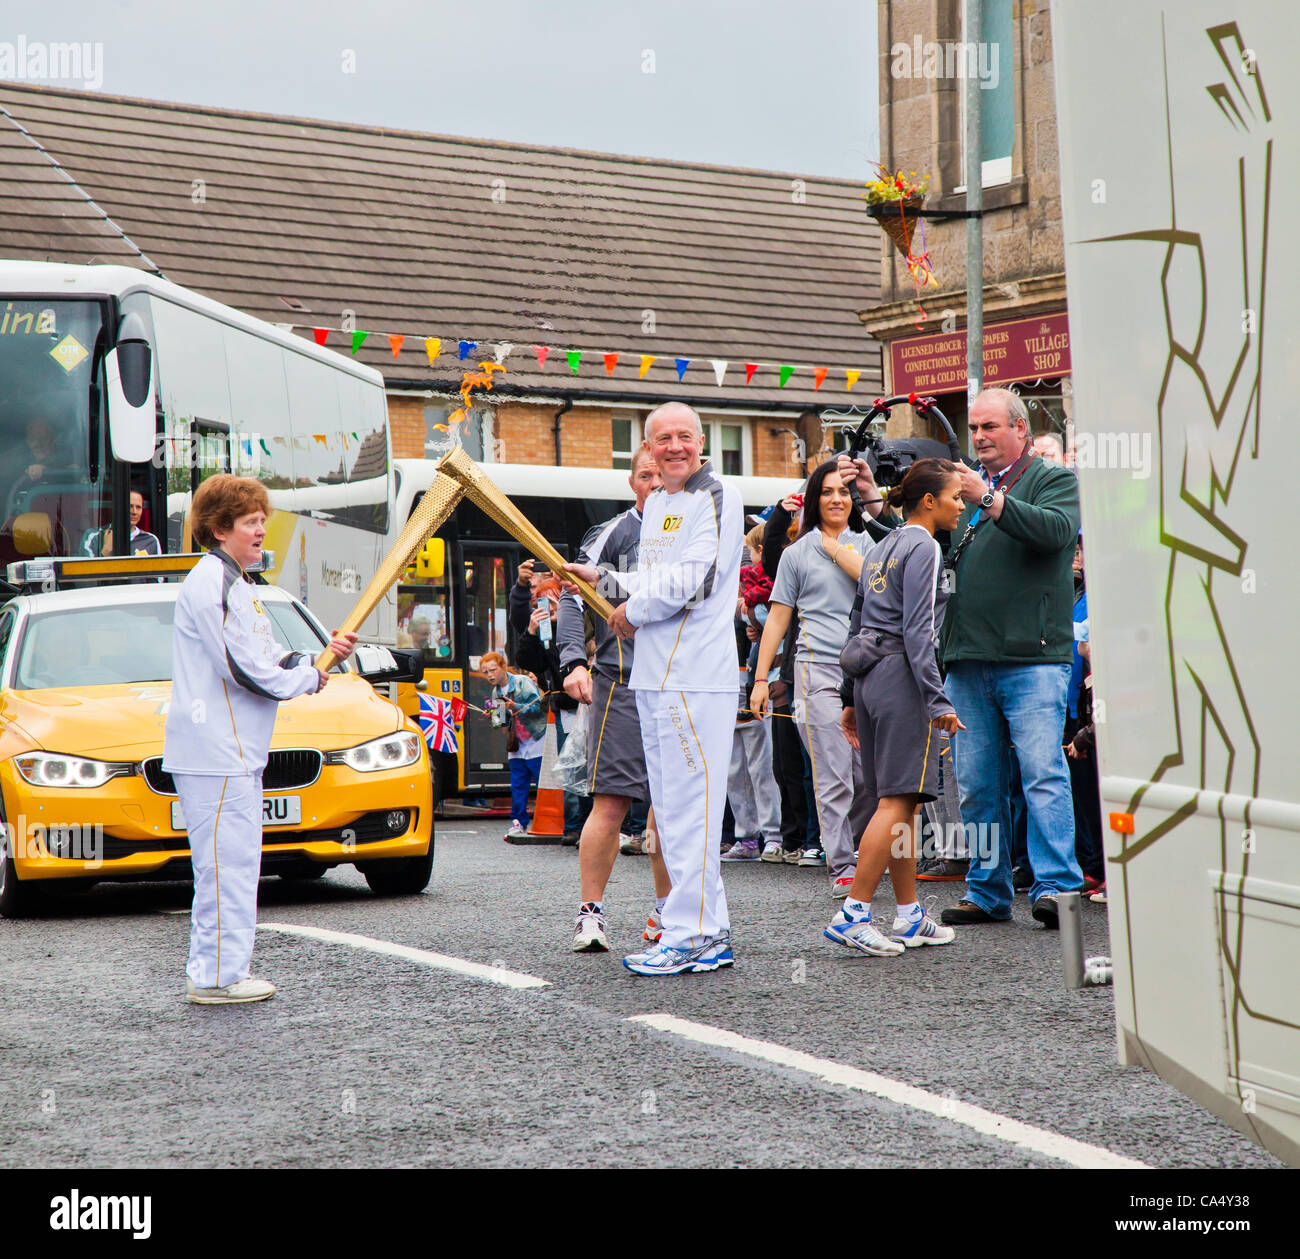 Friday 8th June 2012. North Ayrshire, Scotland, UK. Angela Oakley, 53, a Fairtrade campaigner from Glasgow passes the Olympic Flame to Thomas Tracey, 59, a charity marathon runner from Glasgow in Barrmill, North Ayrshire Stock Photo